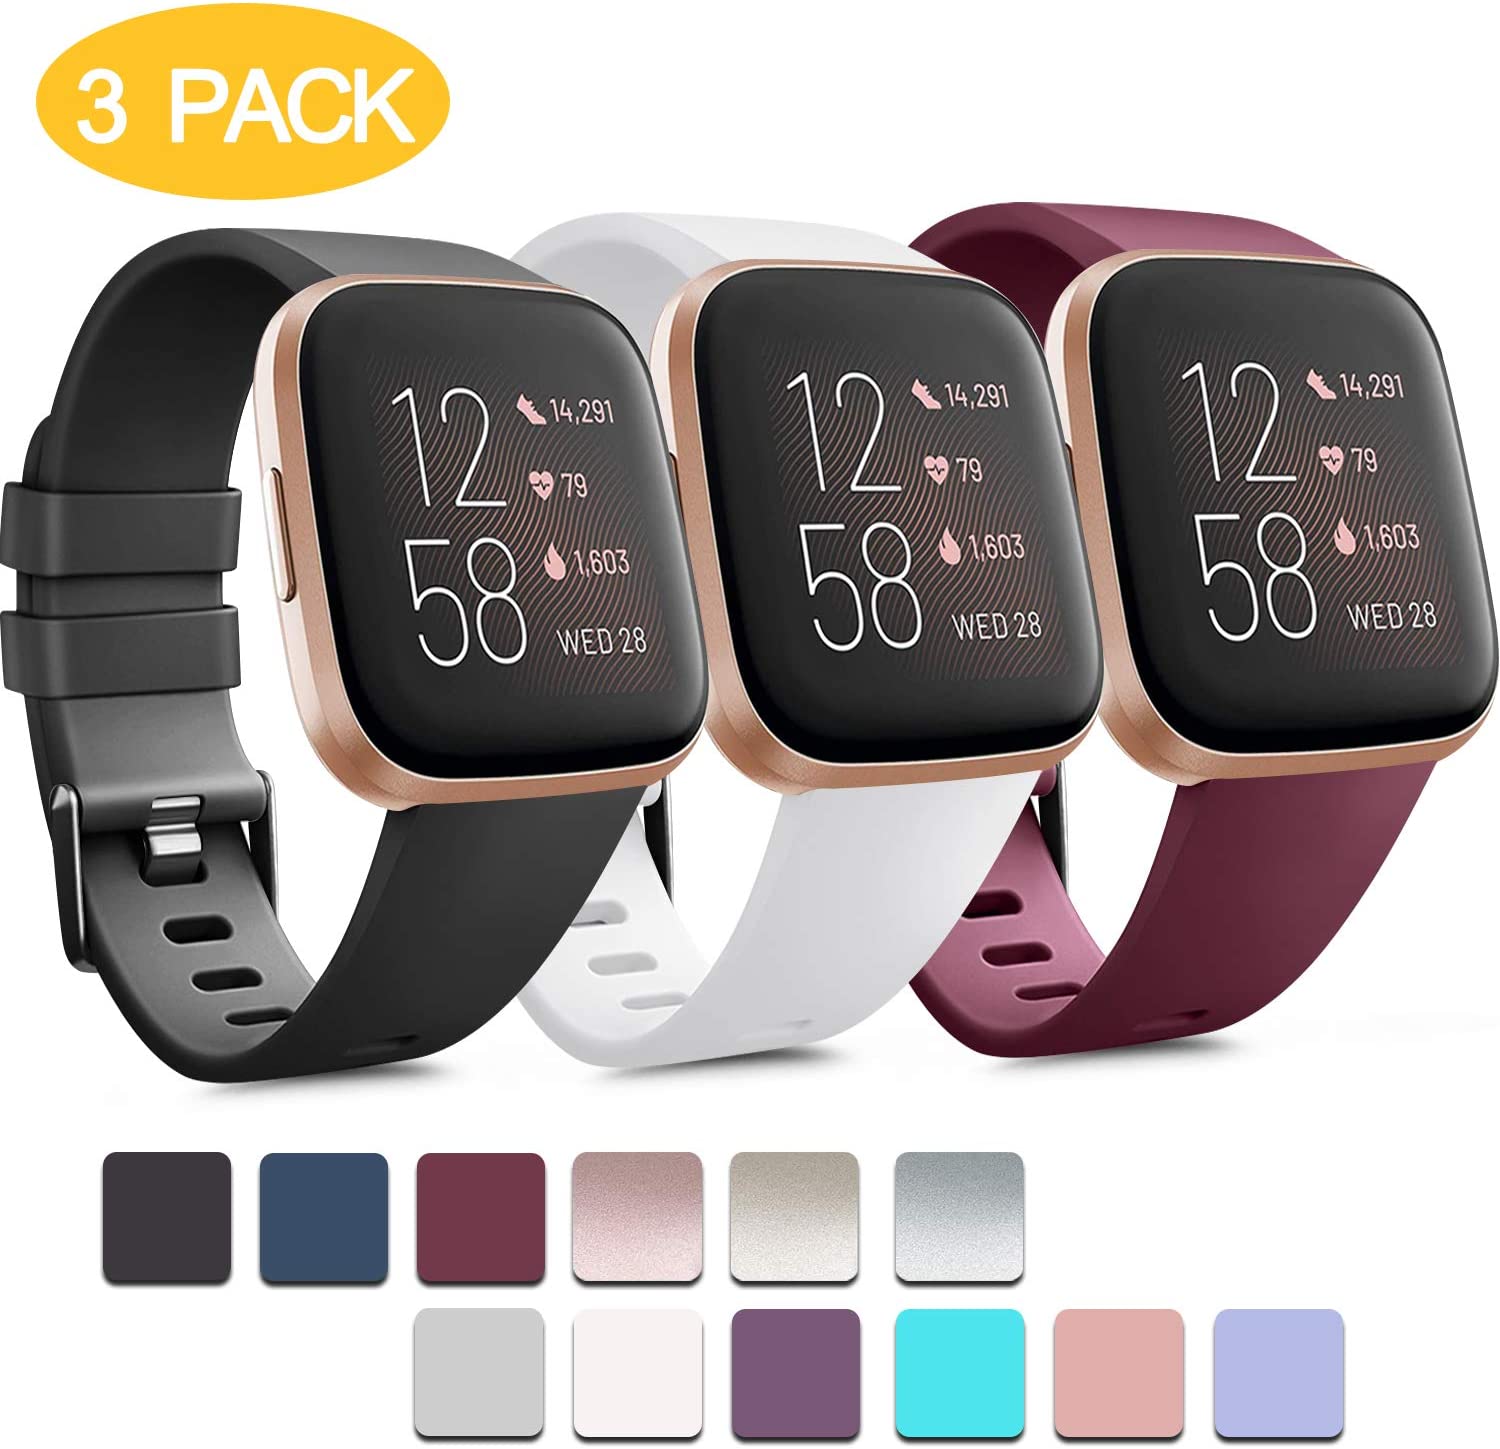 Pack 3 Soft Silicone Bands for Fitbit Versa 2 Large, Black+White+Wine Red Fitbit Versa/Fitbit Versa Lite Classic Adjustable Sport Bands for Women Men Small Large Without Tracker 